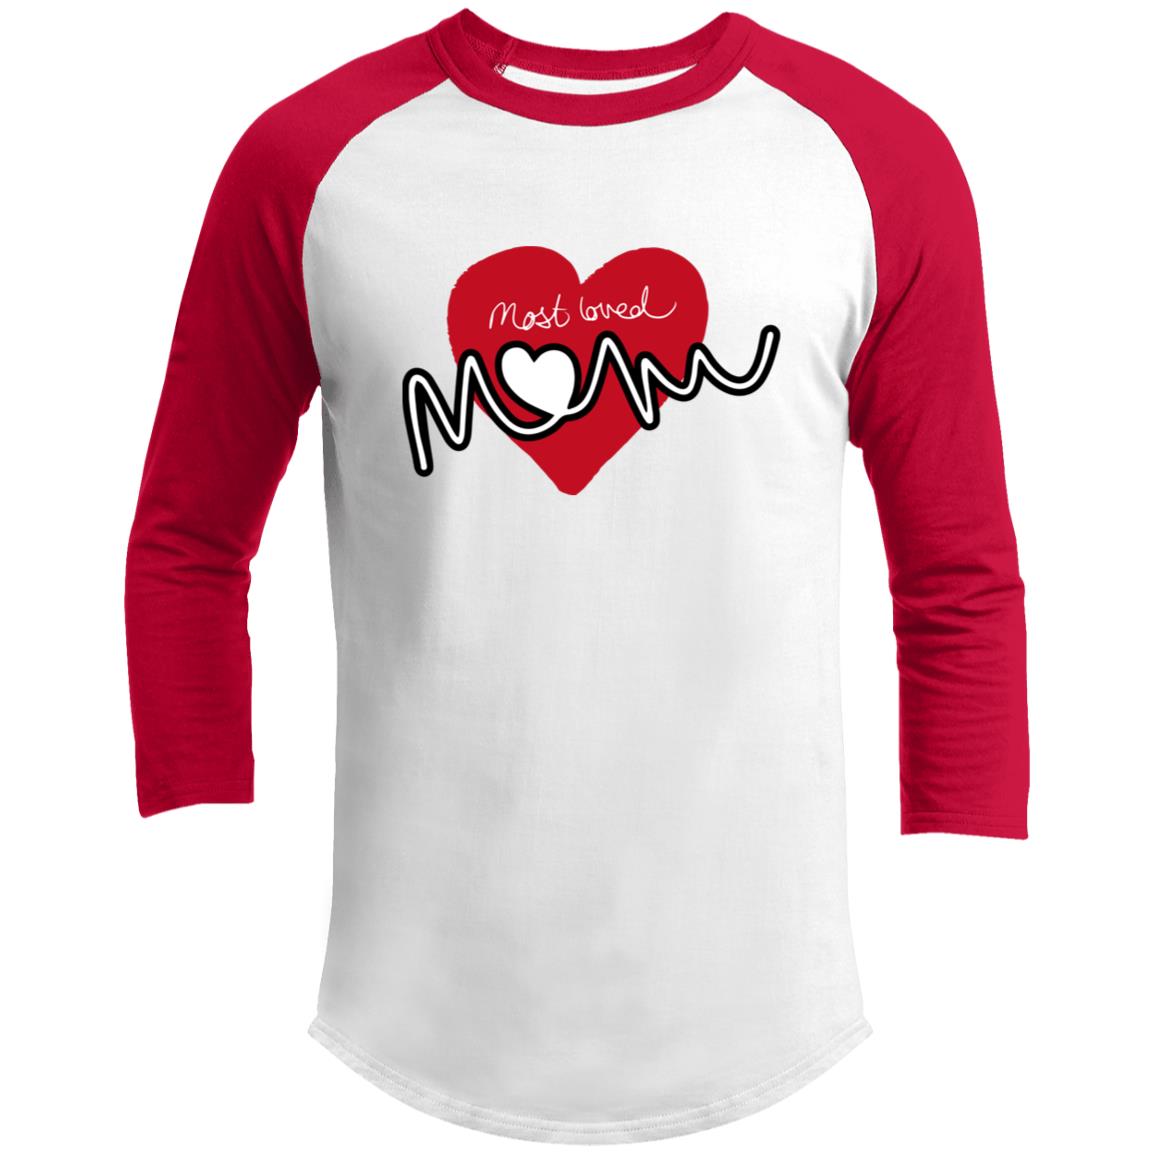 White Raglan sleeved shirt with red sleeves and collar.  Red heart design center chest with "most loved Mom" hand written text featured in front of it. 